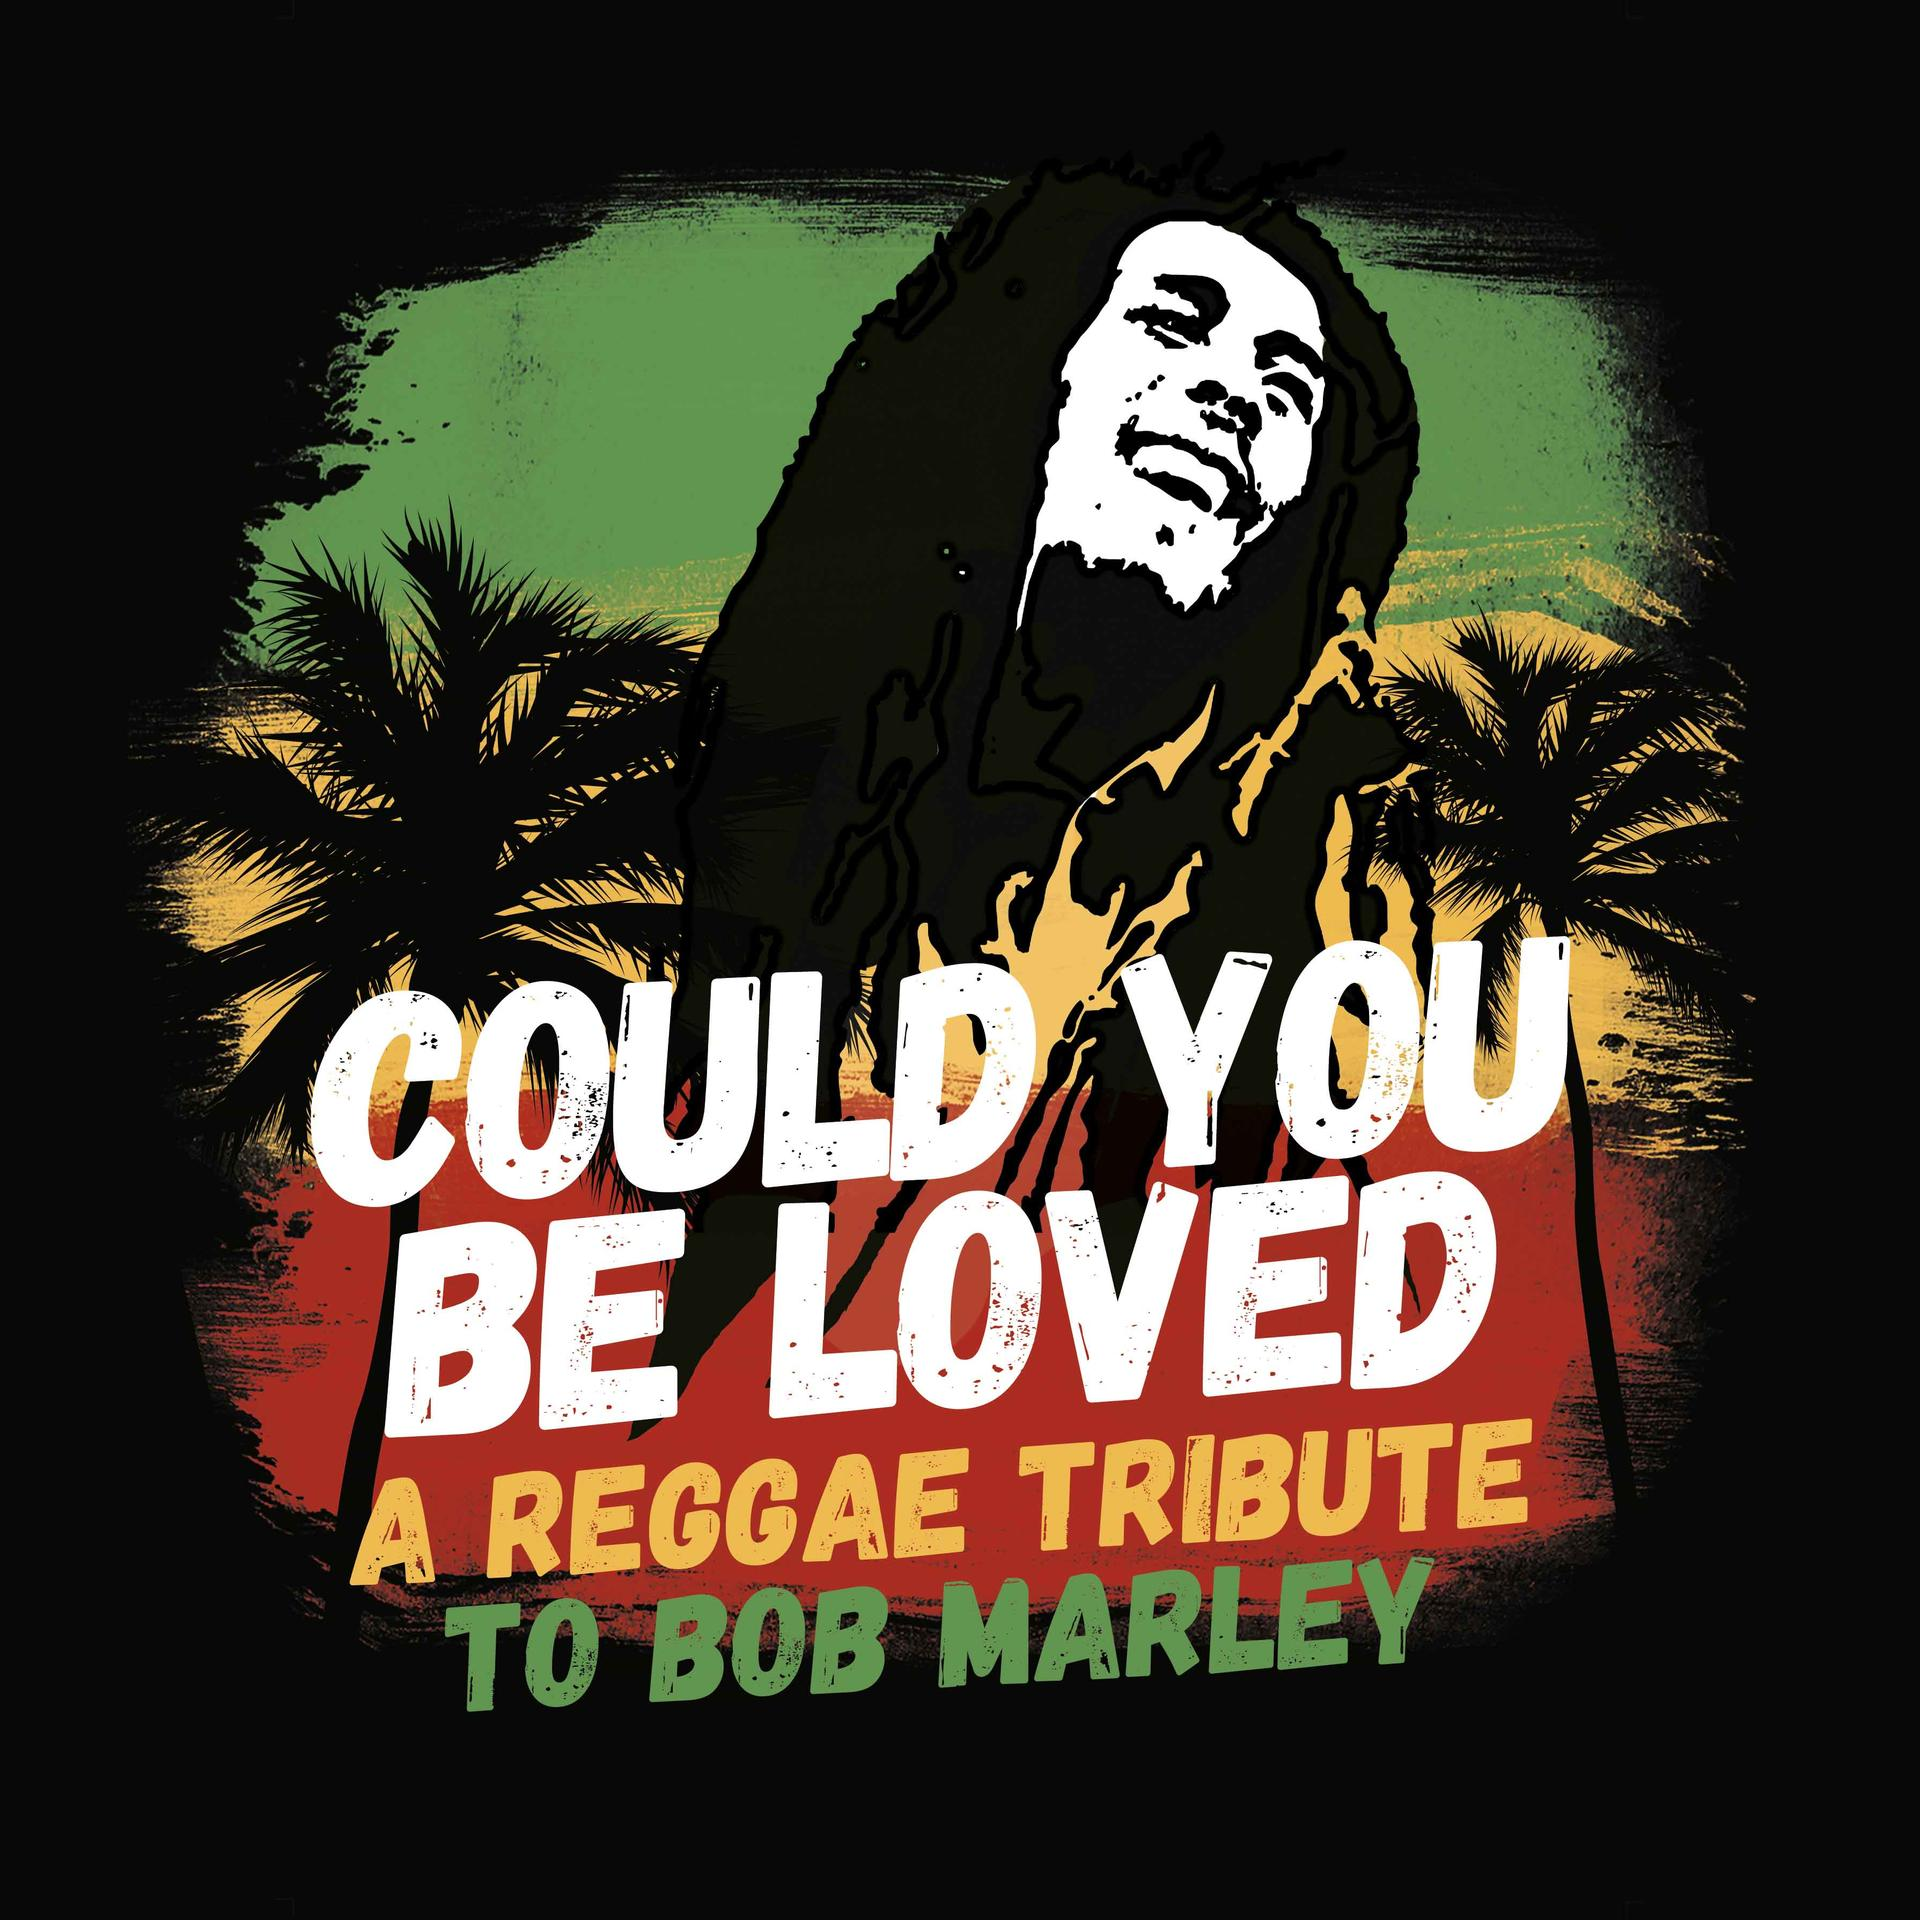 VARIOUS - Could You Be (Vinyl) Marley Bob (LP/Green) - Loved - Tribute To